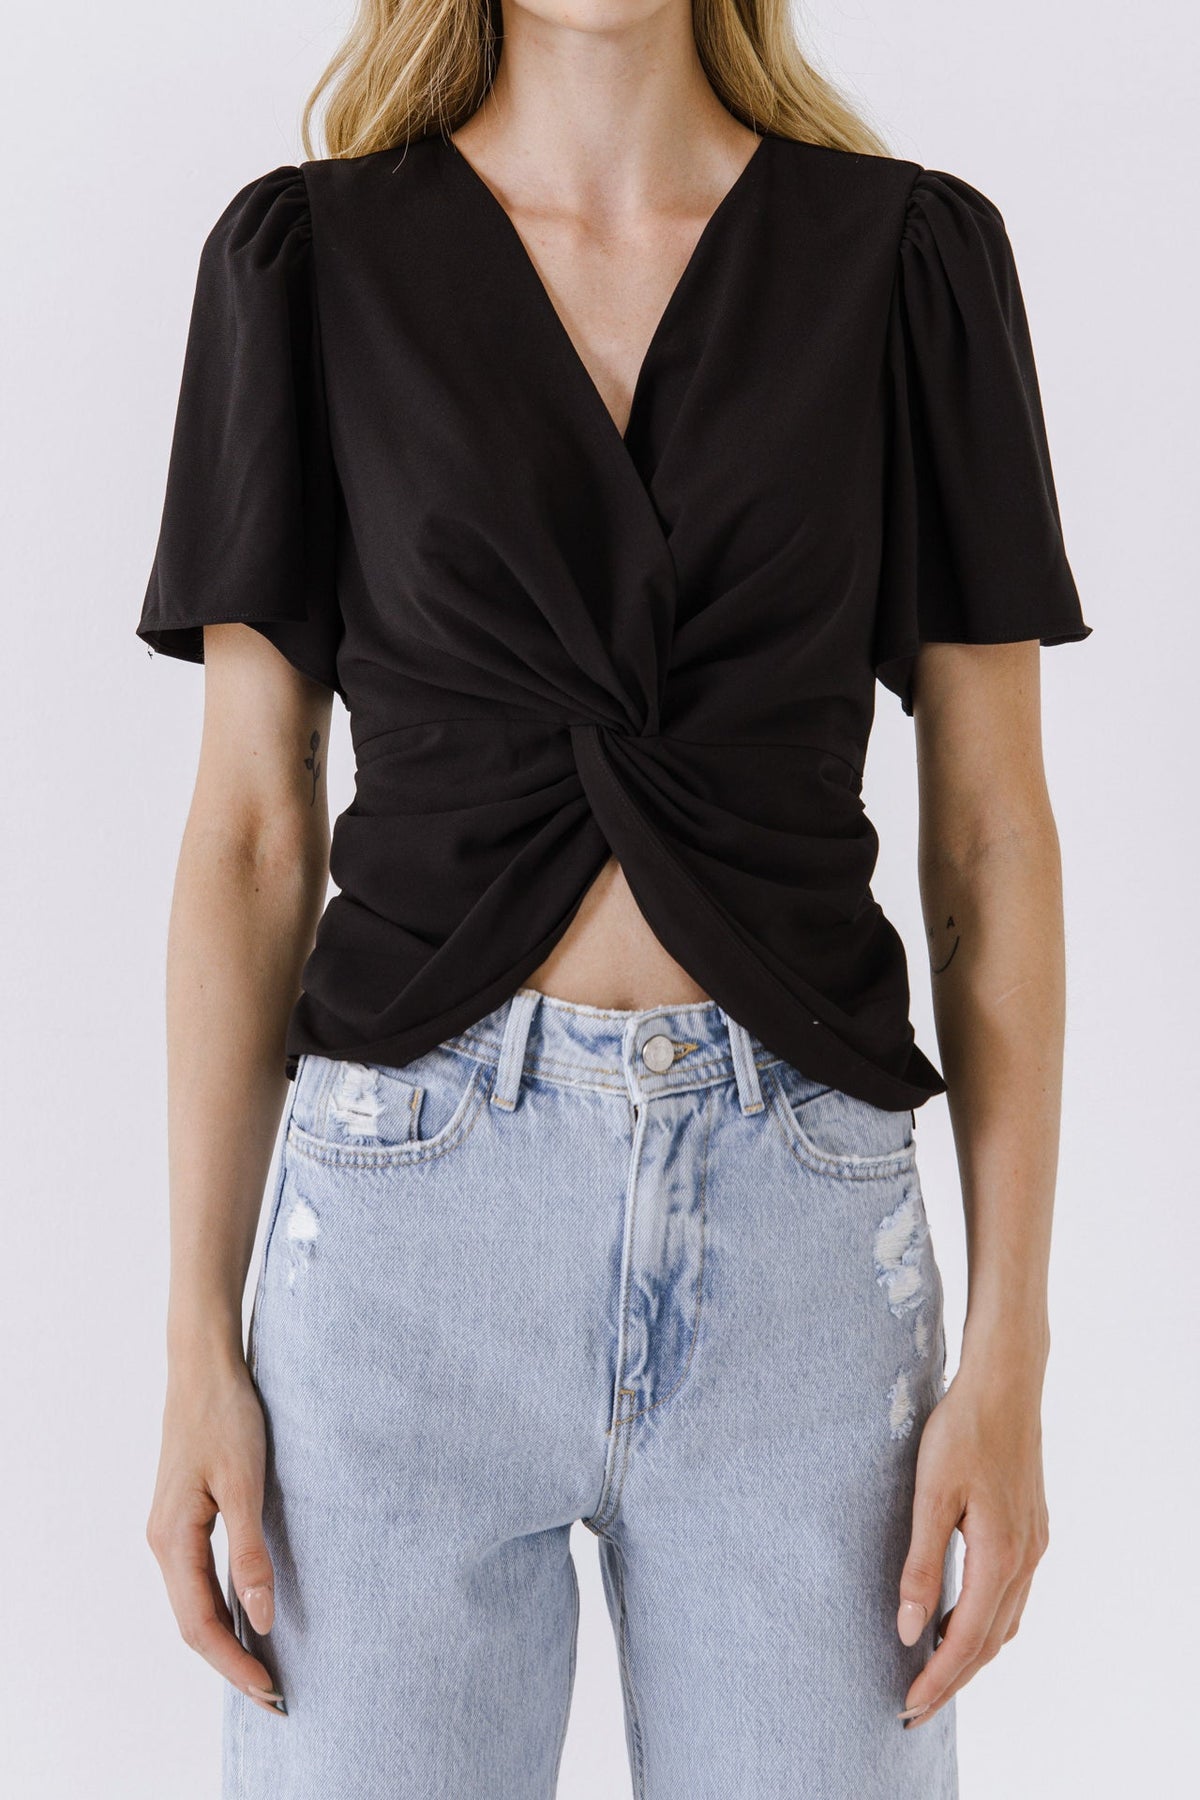 ENDLESS ROSE - Solid Regular Top - TOPS available at Objectrare